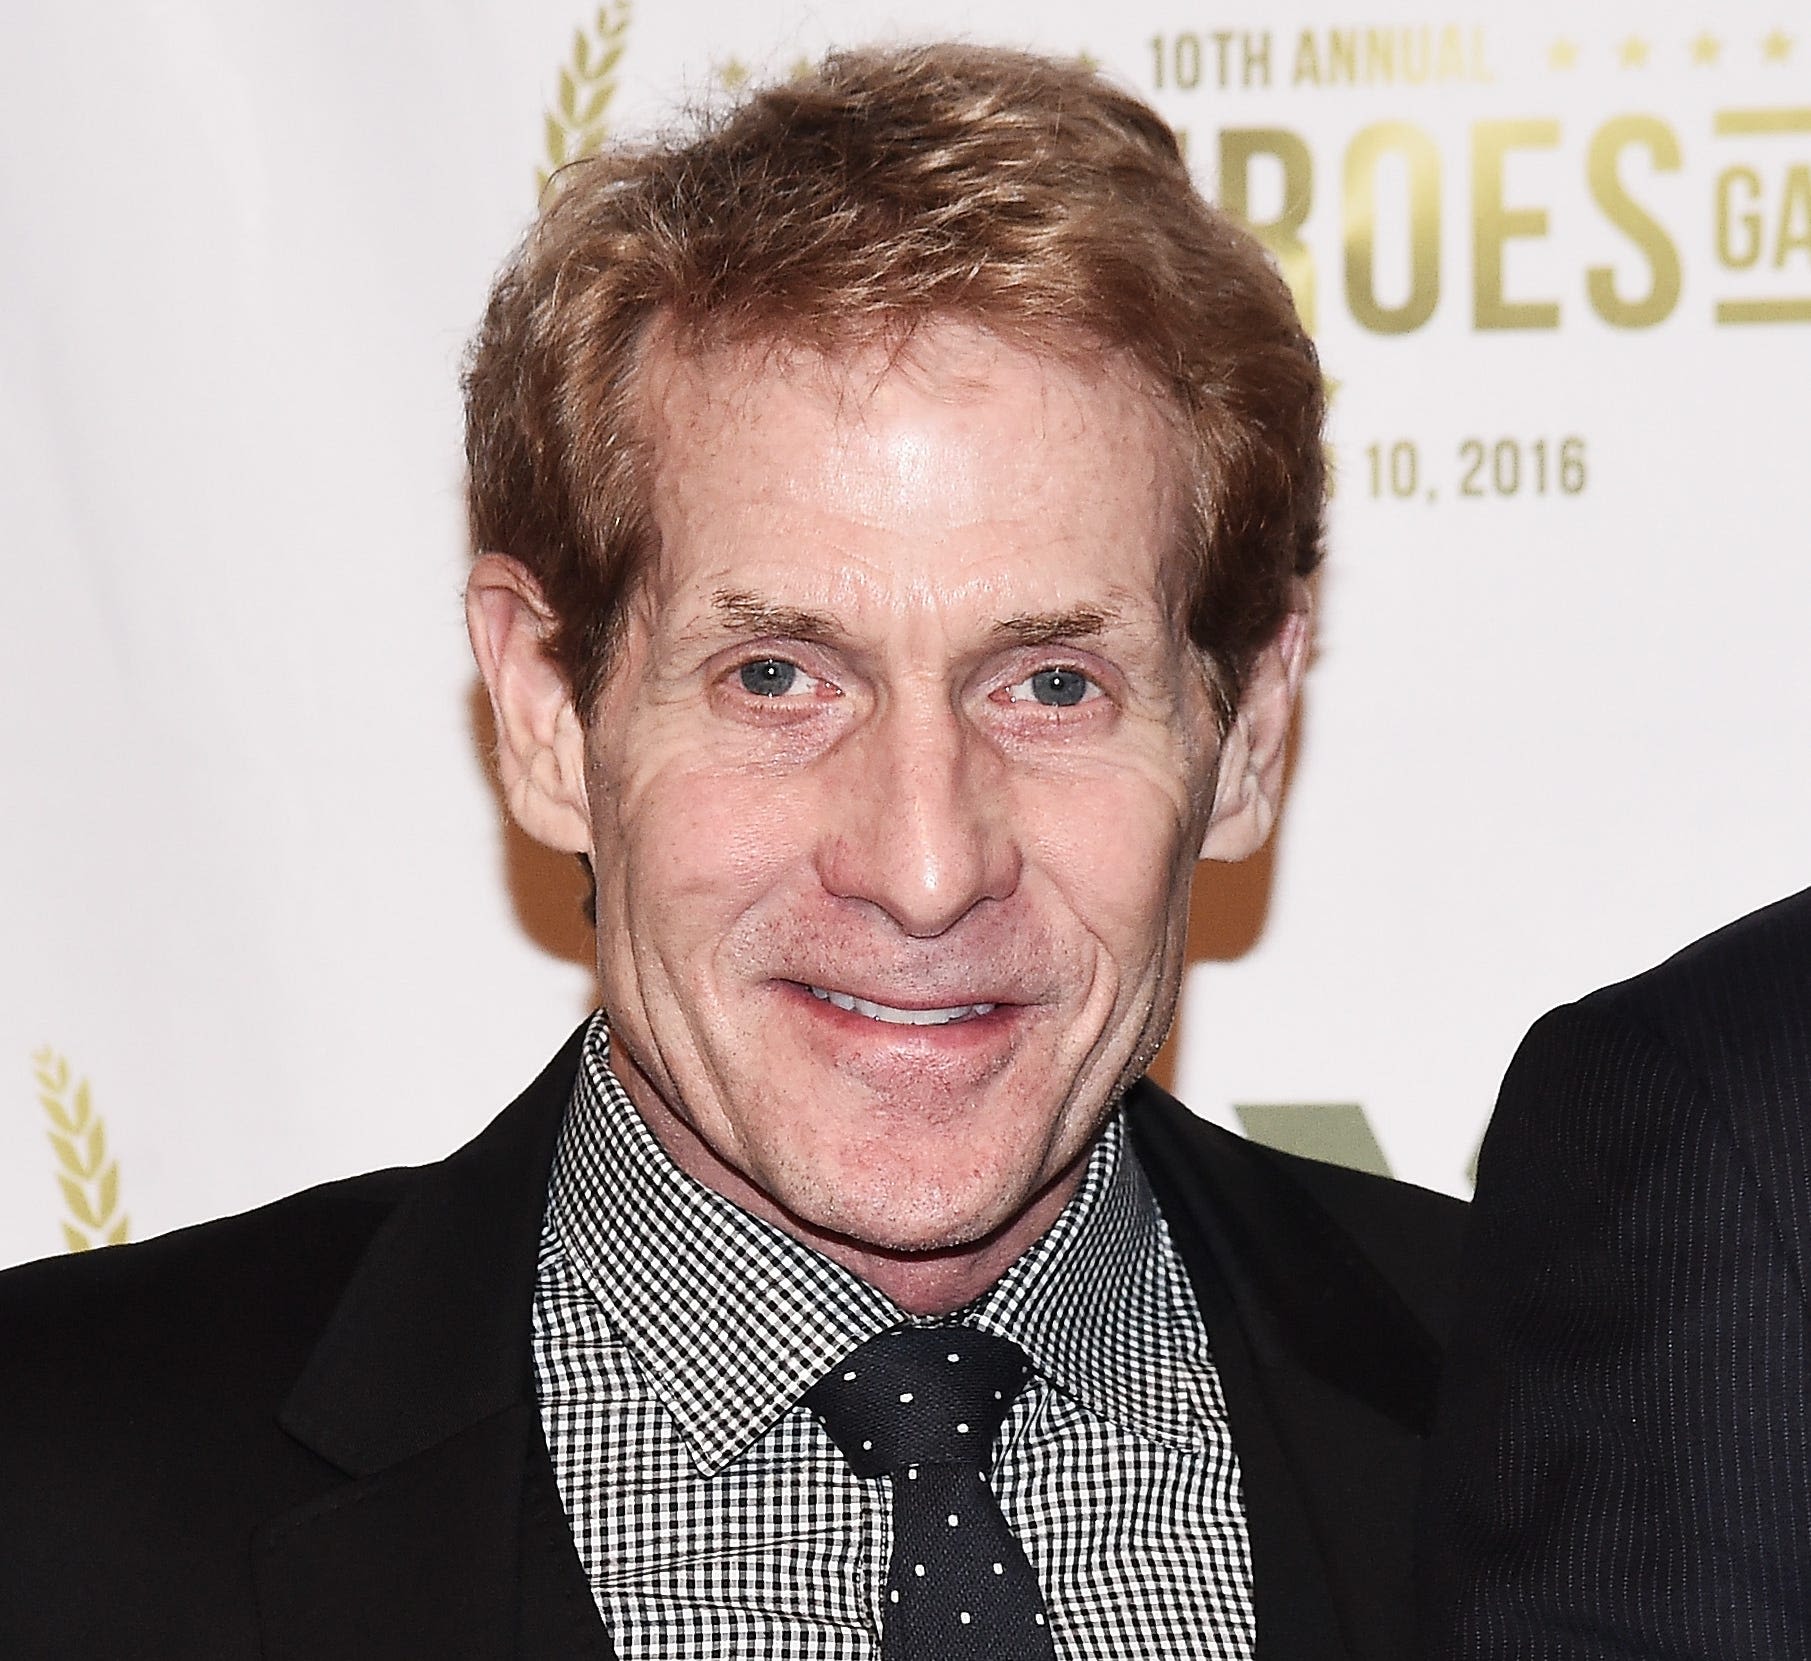 Skip Bayless leaving FS1's 'Undisputed' later this summer, according to reports